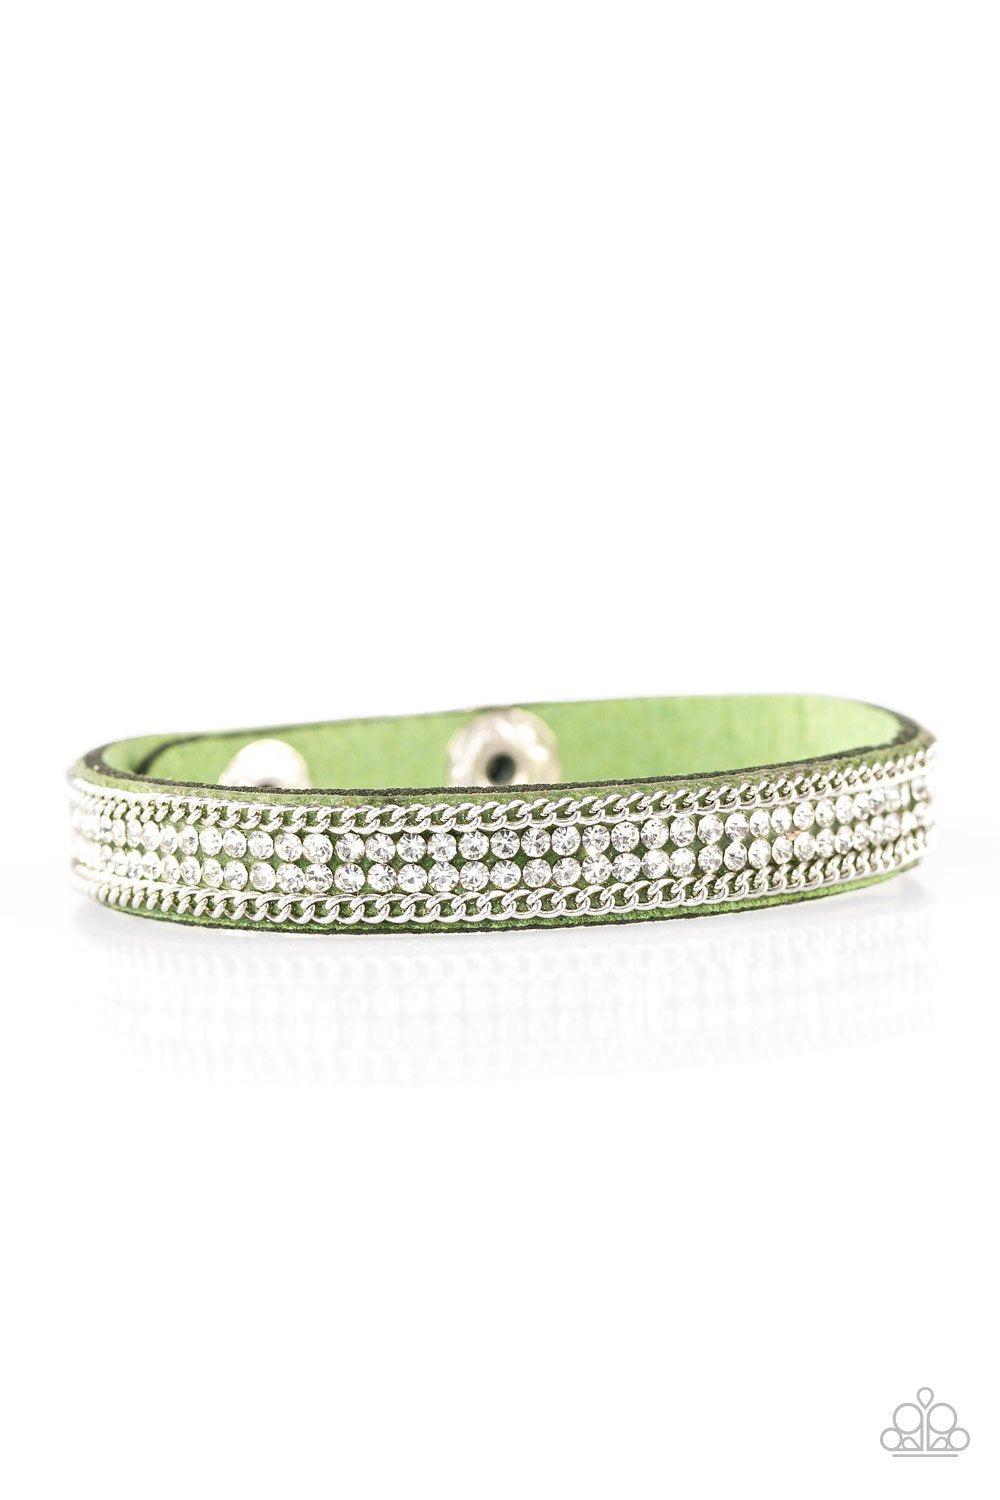 Babe Bling Green and White Narrow Wrap Snap Bracelet - Paparazzi Accessories-CarasShop.com - $5 Jewelry by Cara Jewels